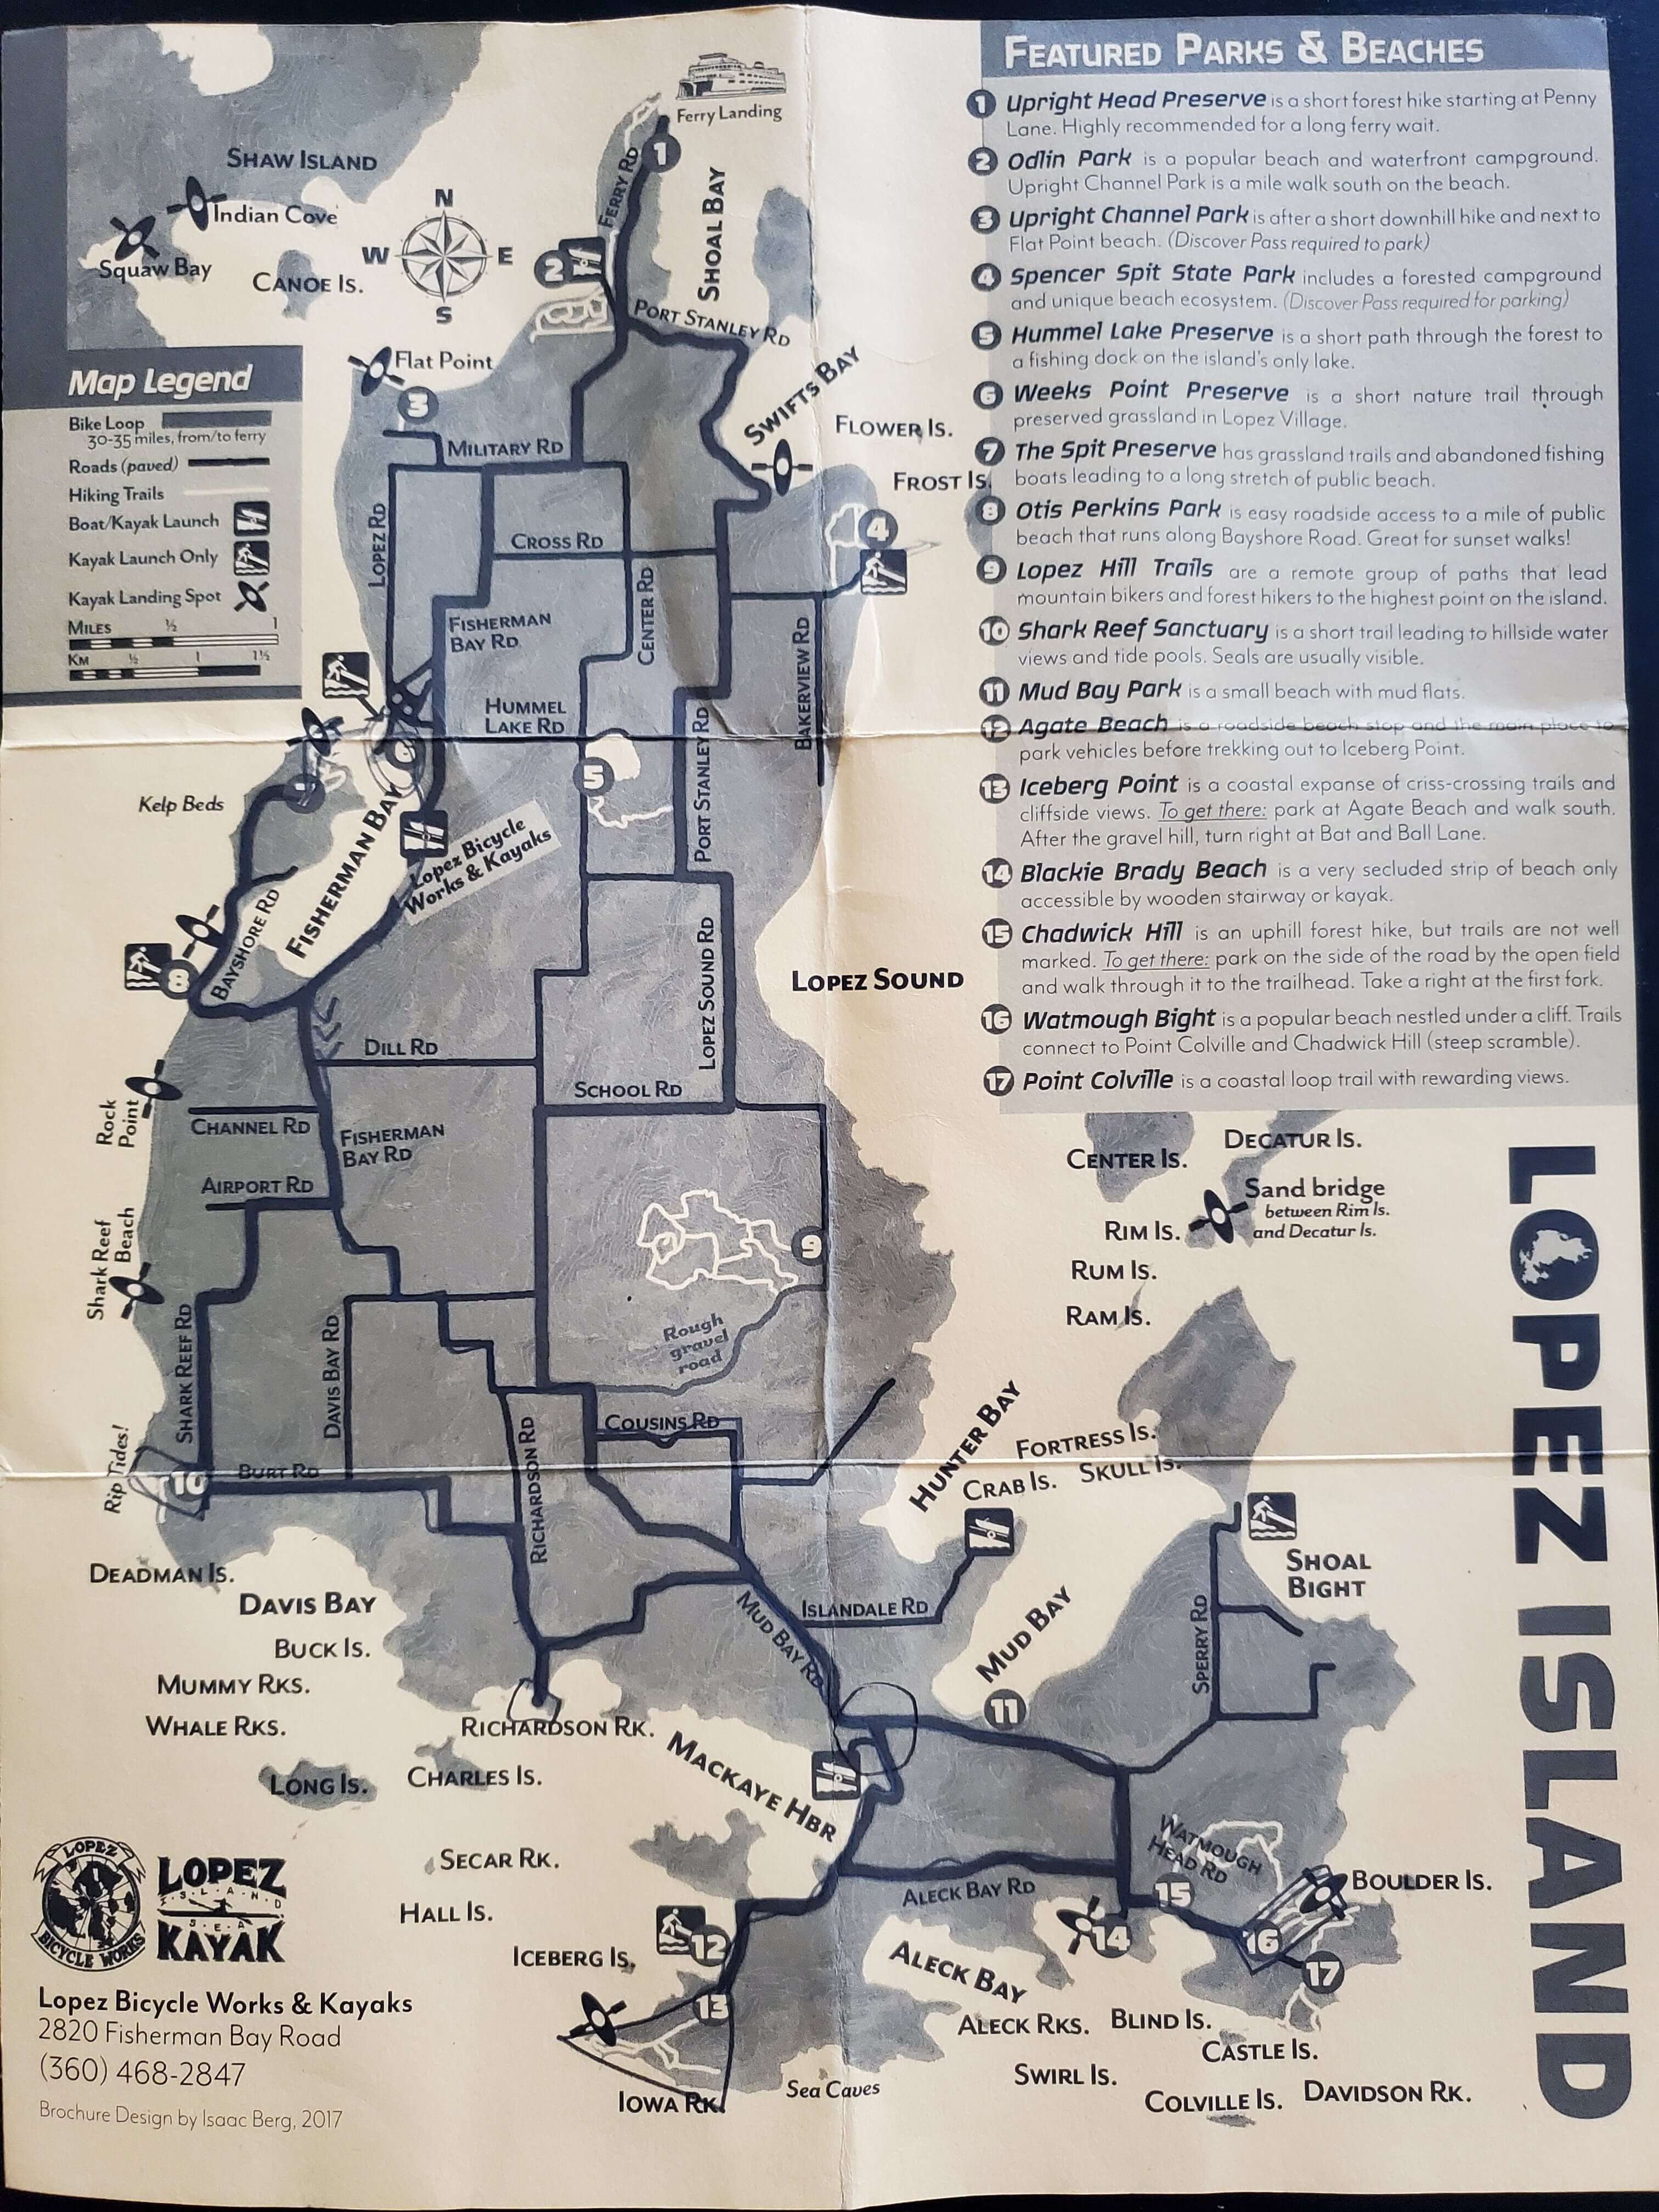 Map and list of featured parks and beaches on Lopez Island